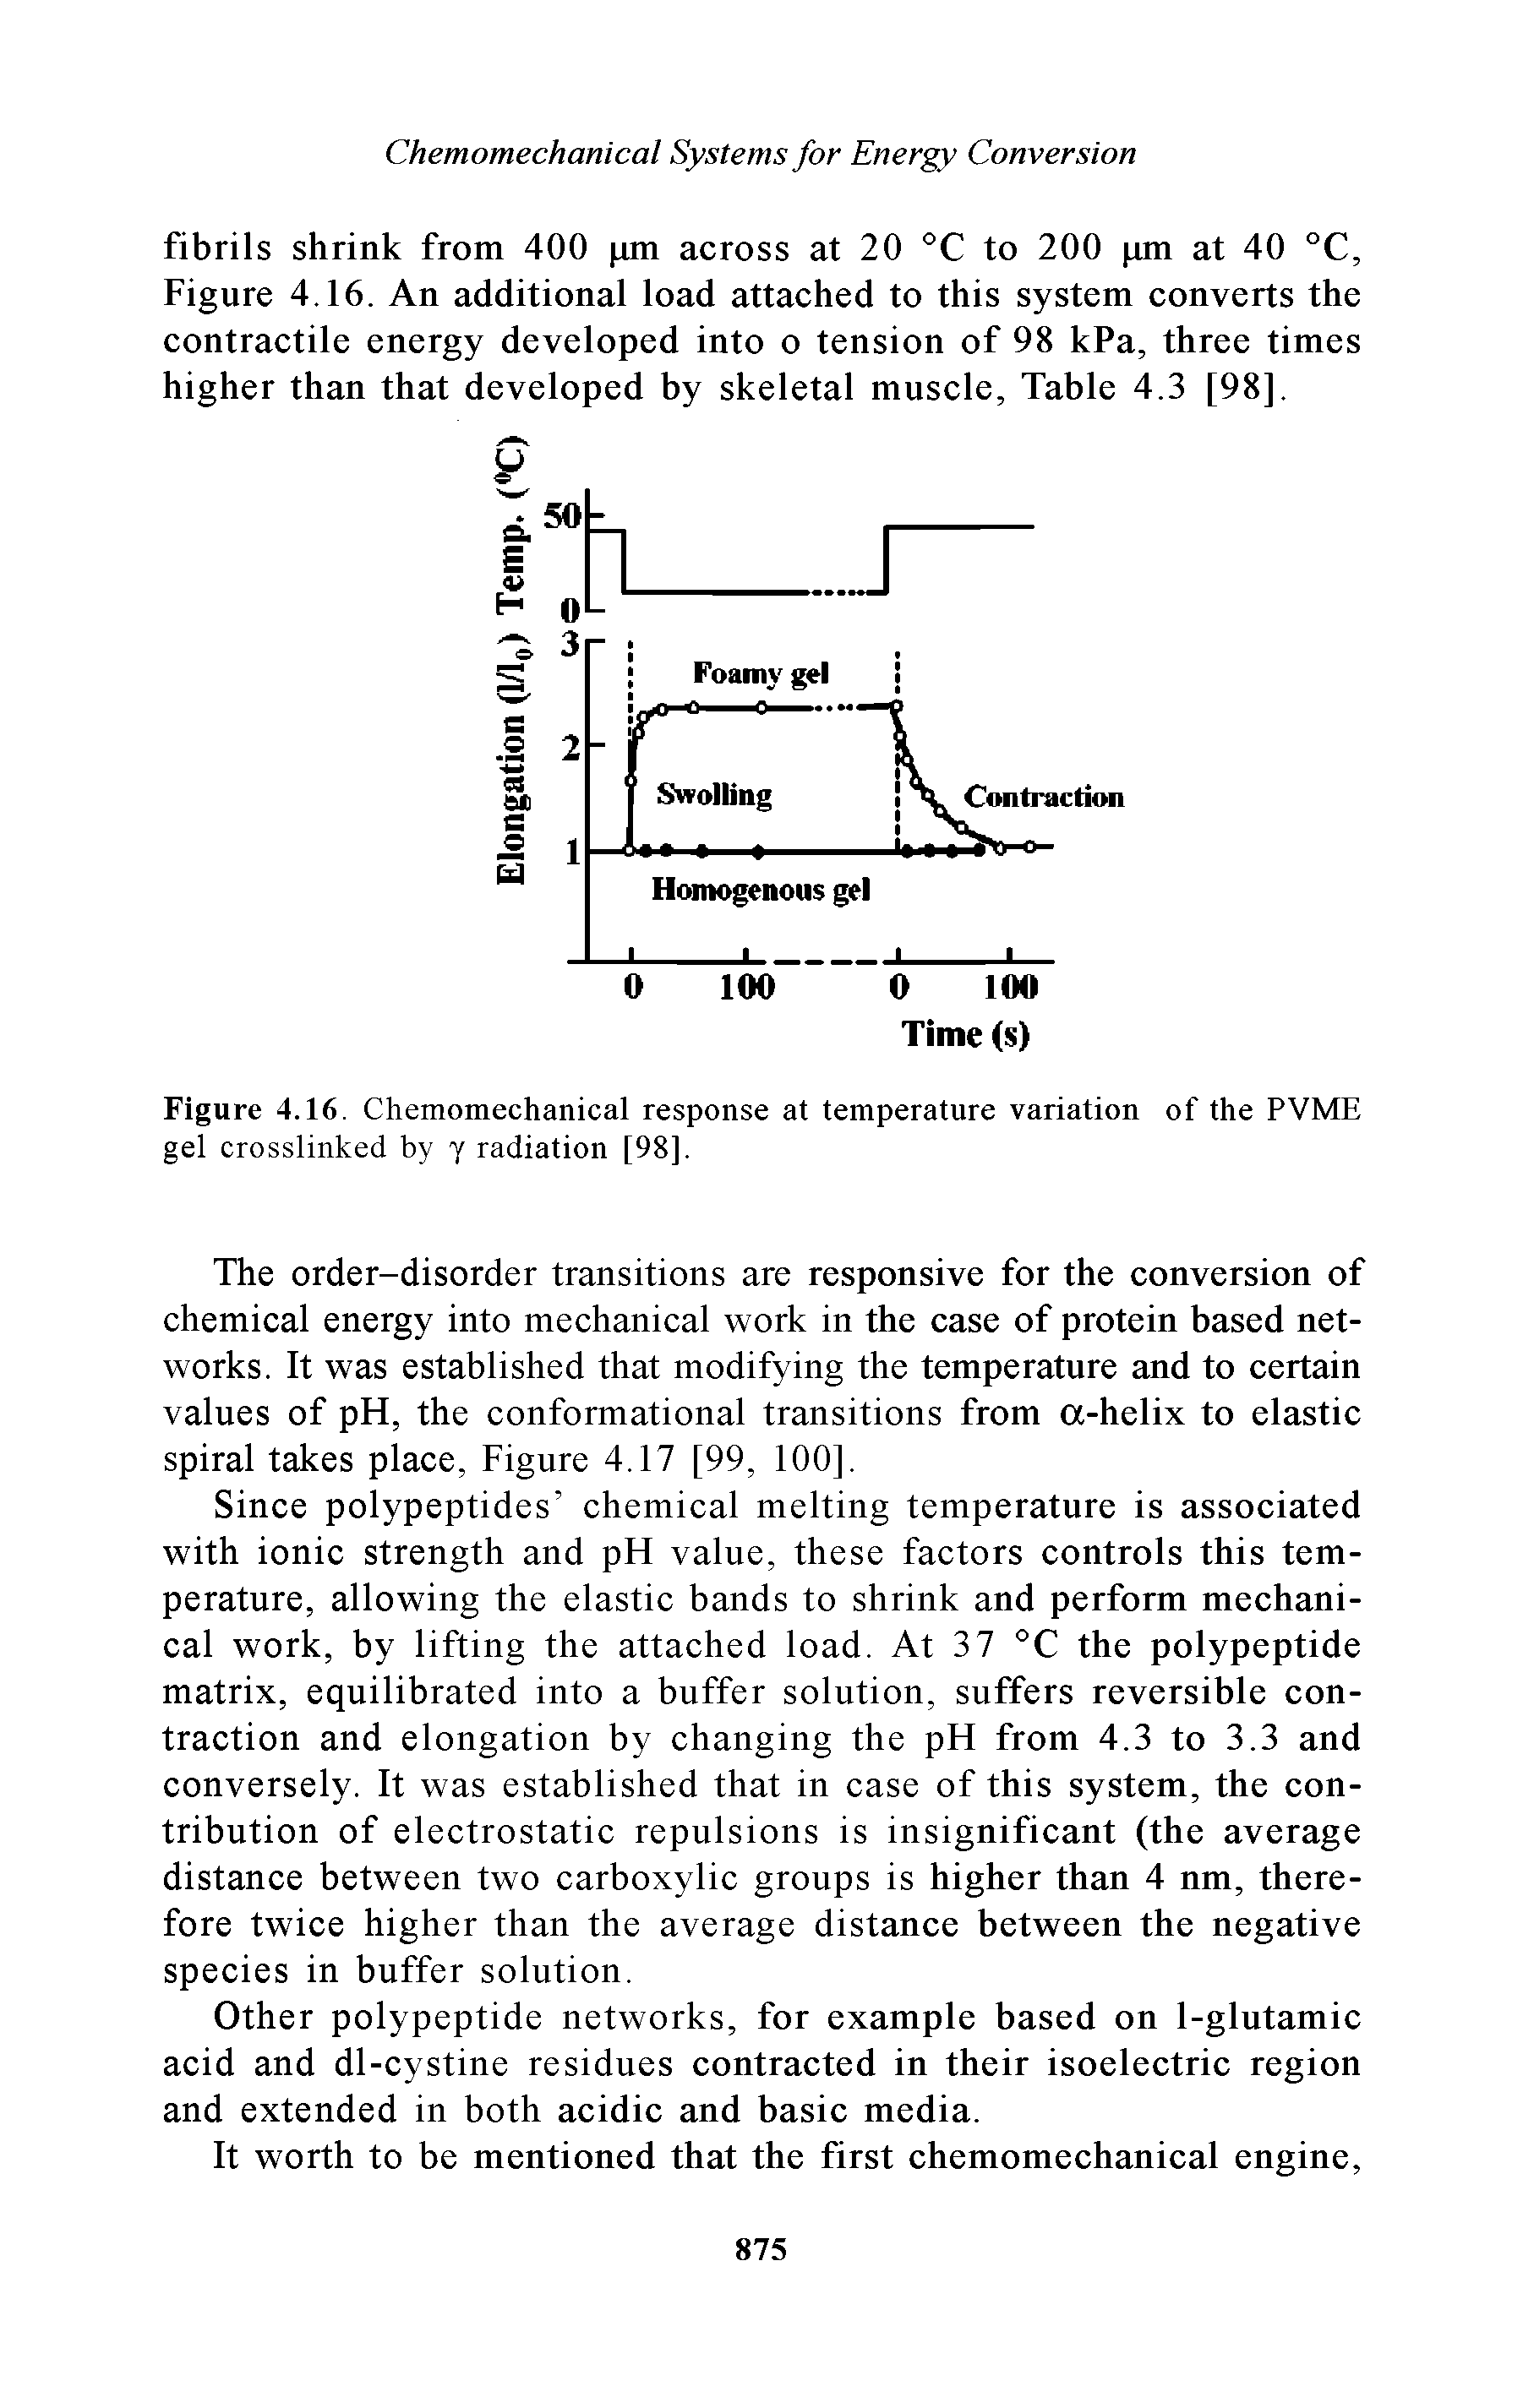 Figure 4.16. Chemomechanical response at temperature variation of the PVME gel crosslinked by y radiation [98].